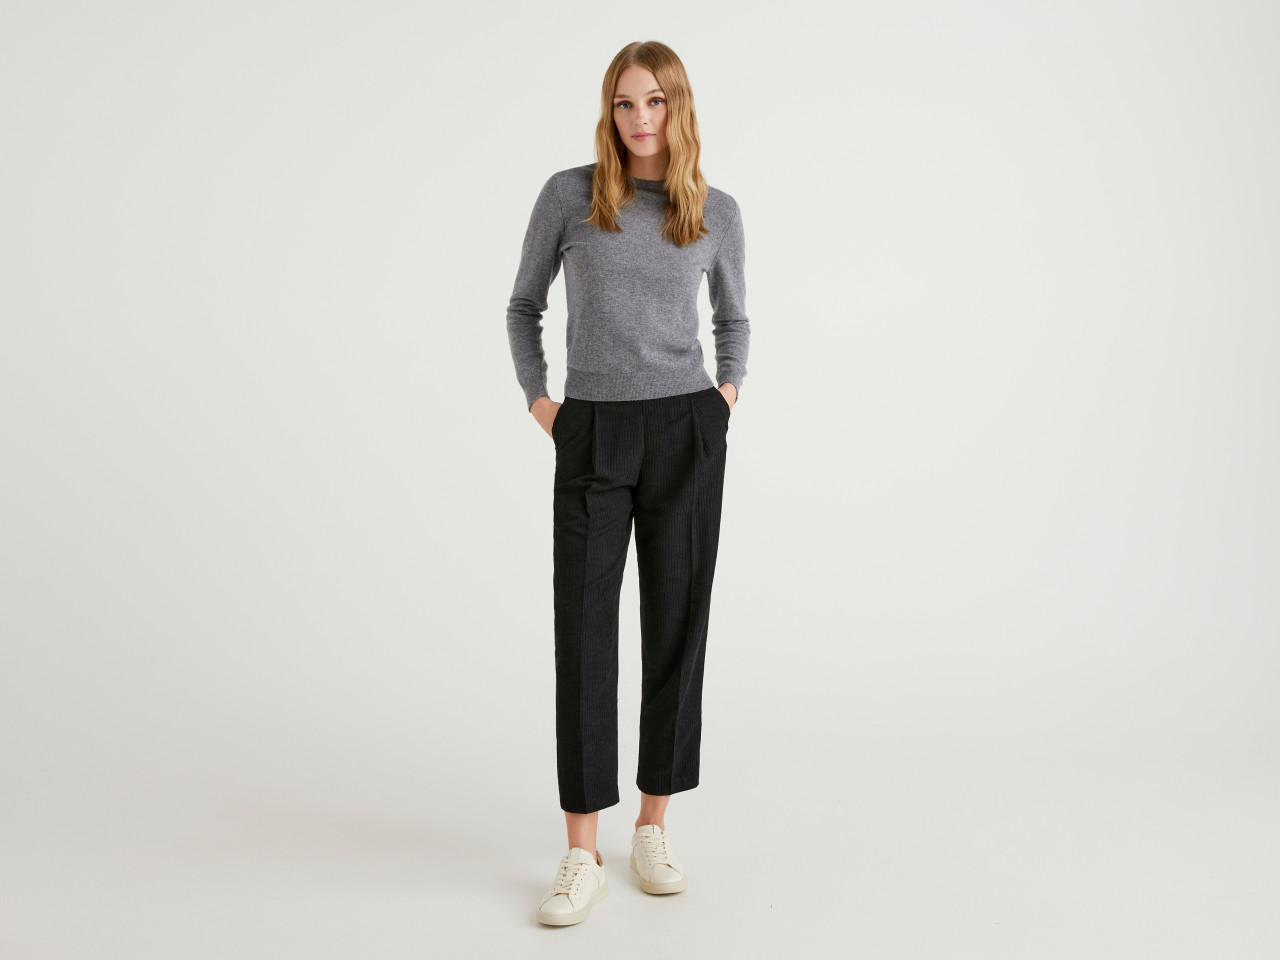 Women's Trousers - 2 colours | VMzona.com - Women's and men's clothing and  accessories at affordable prices.